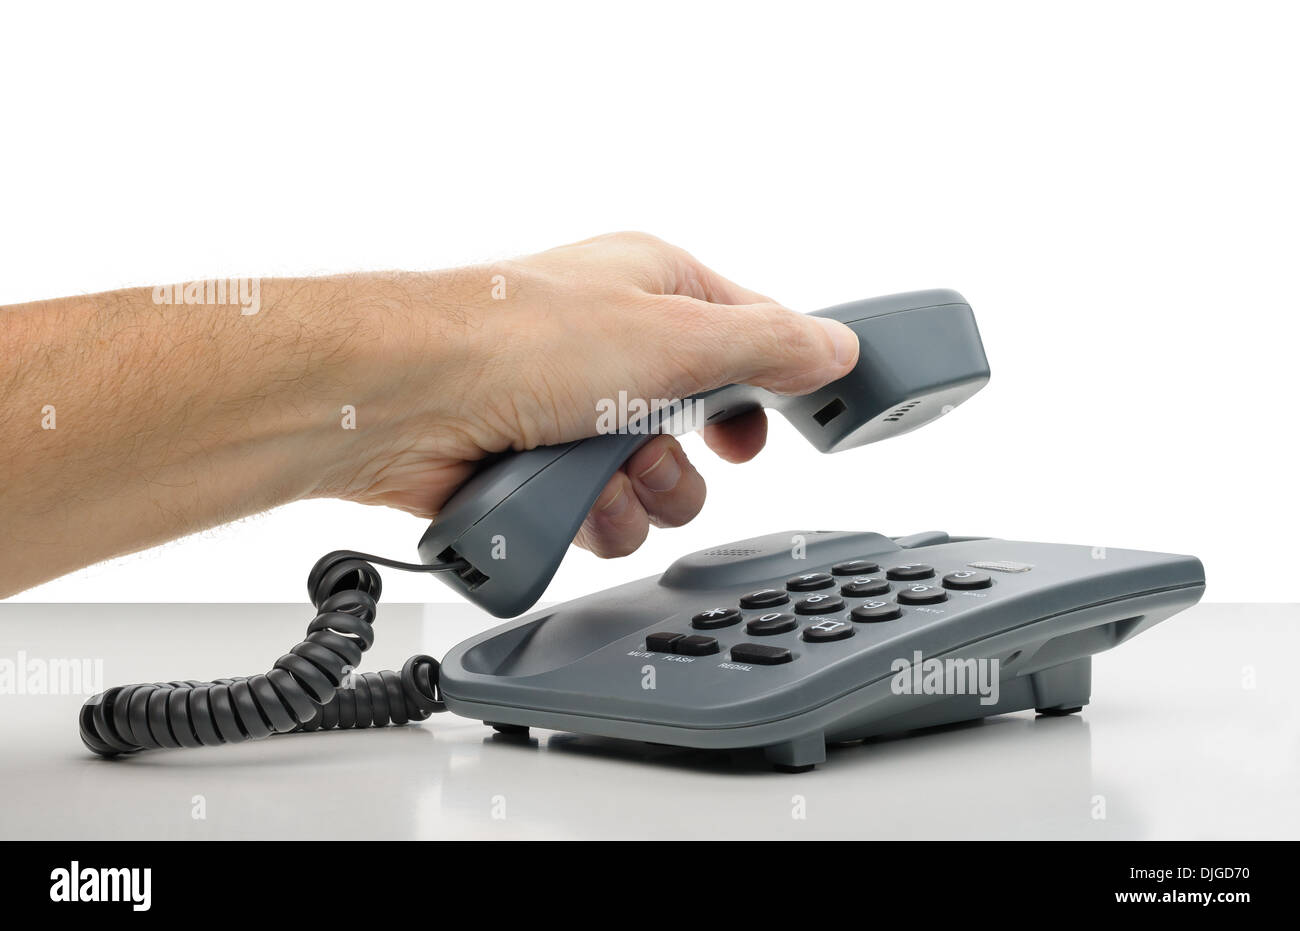 A man's hand hanging the phone receiver Stock Photo